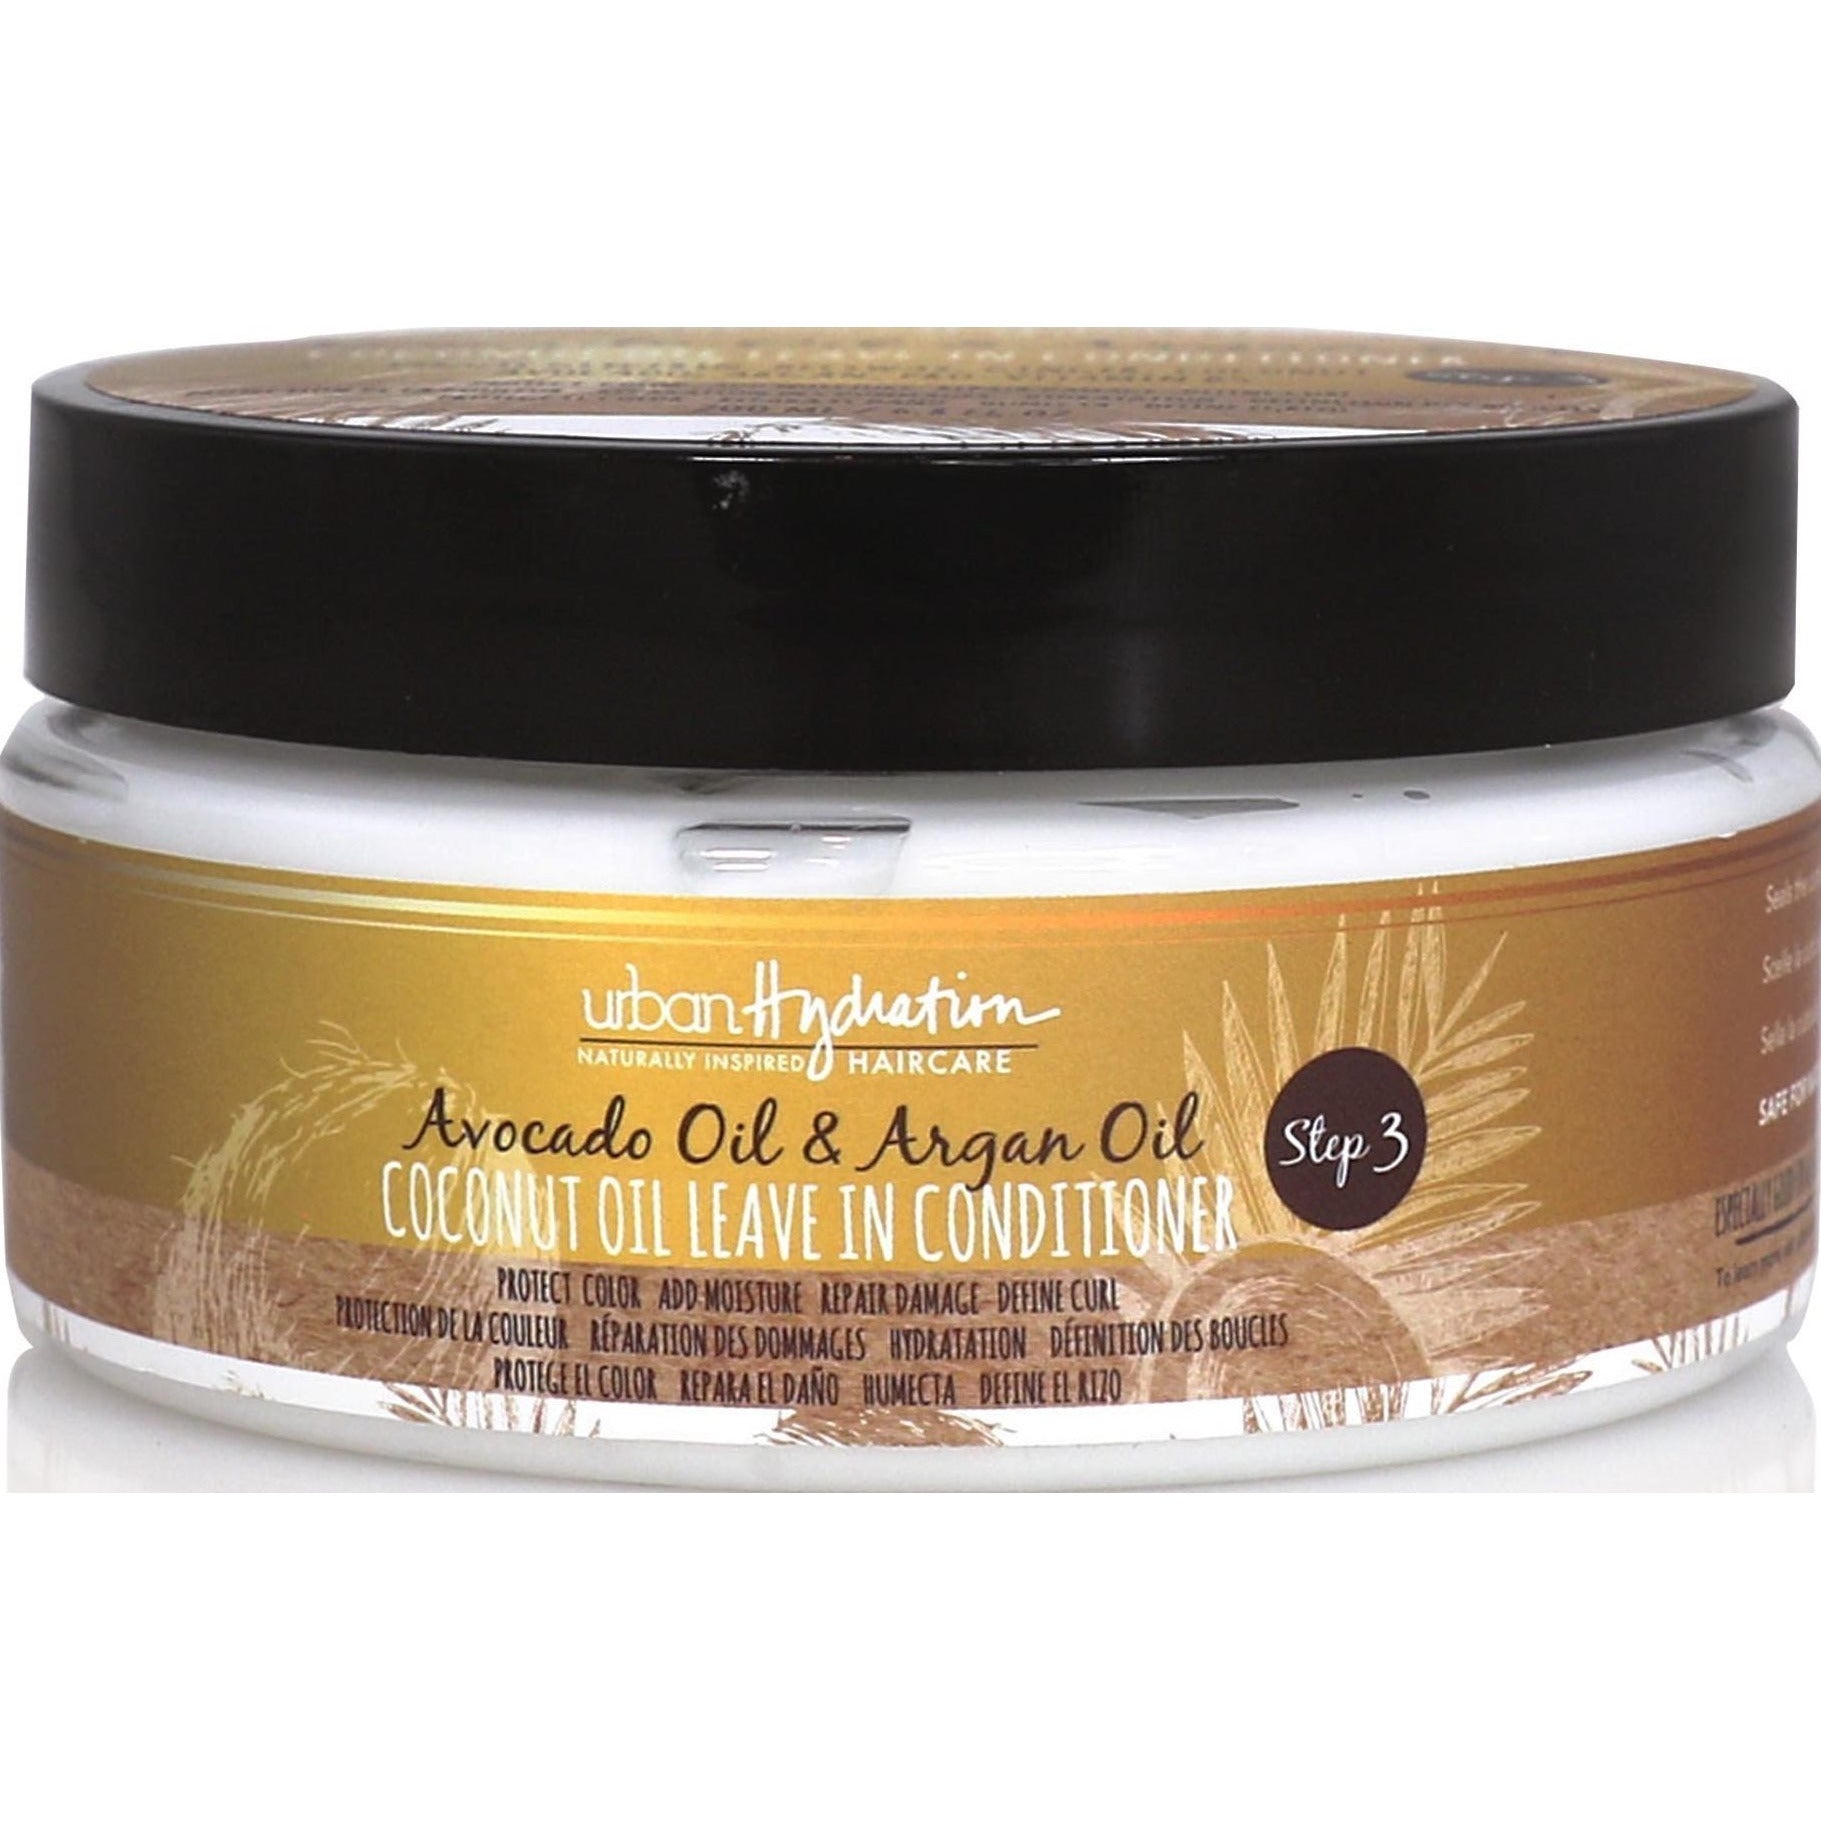 4th Ave Market: Urban Hydration Avocado & argan coconut oil leave in conditioner 6.8 fluid ounce, Wh